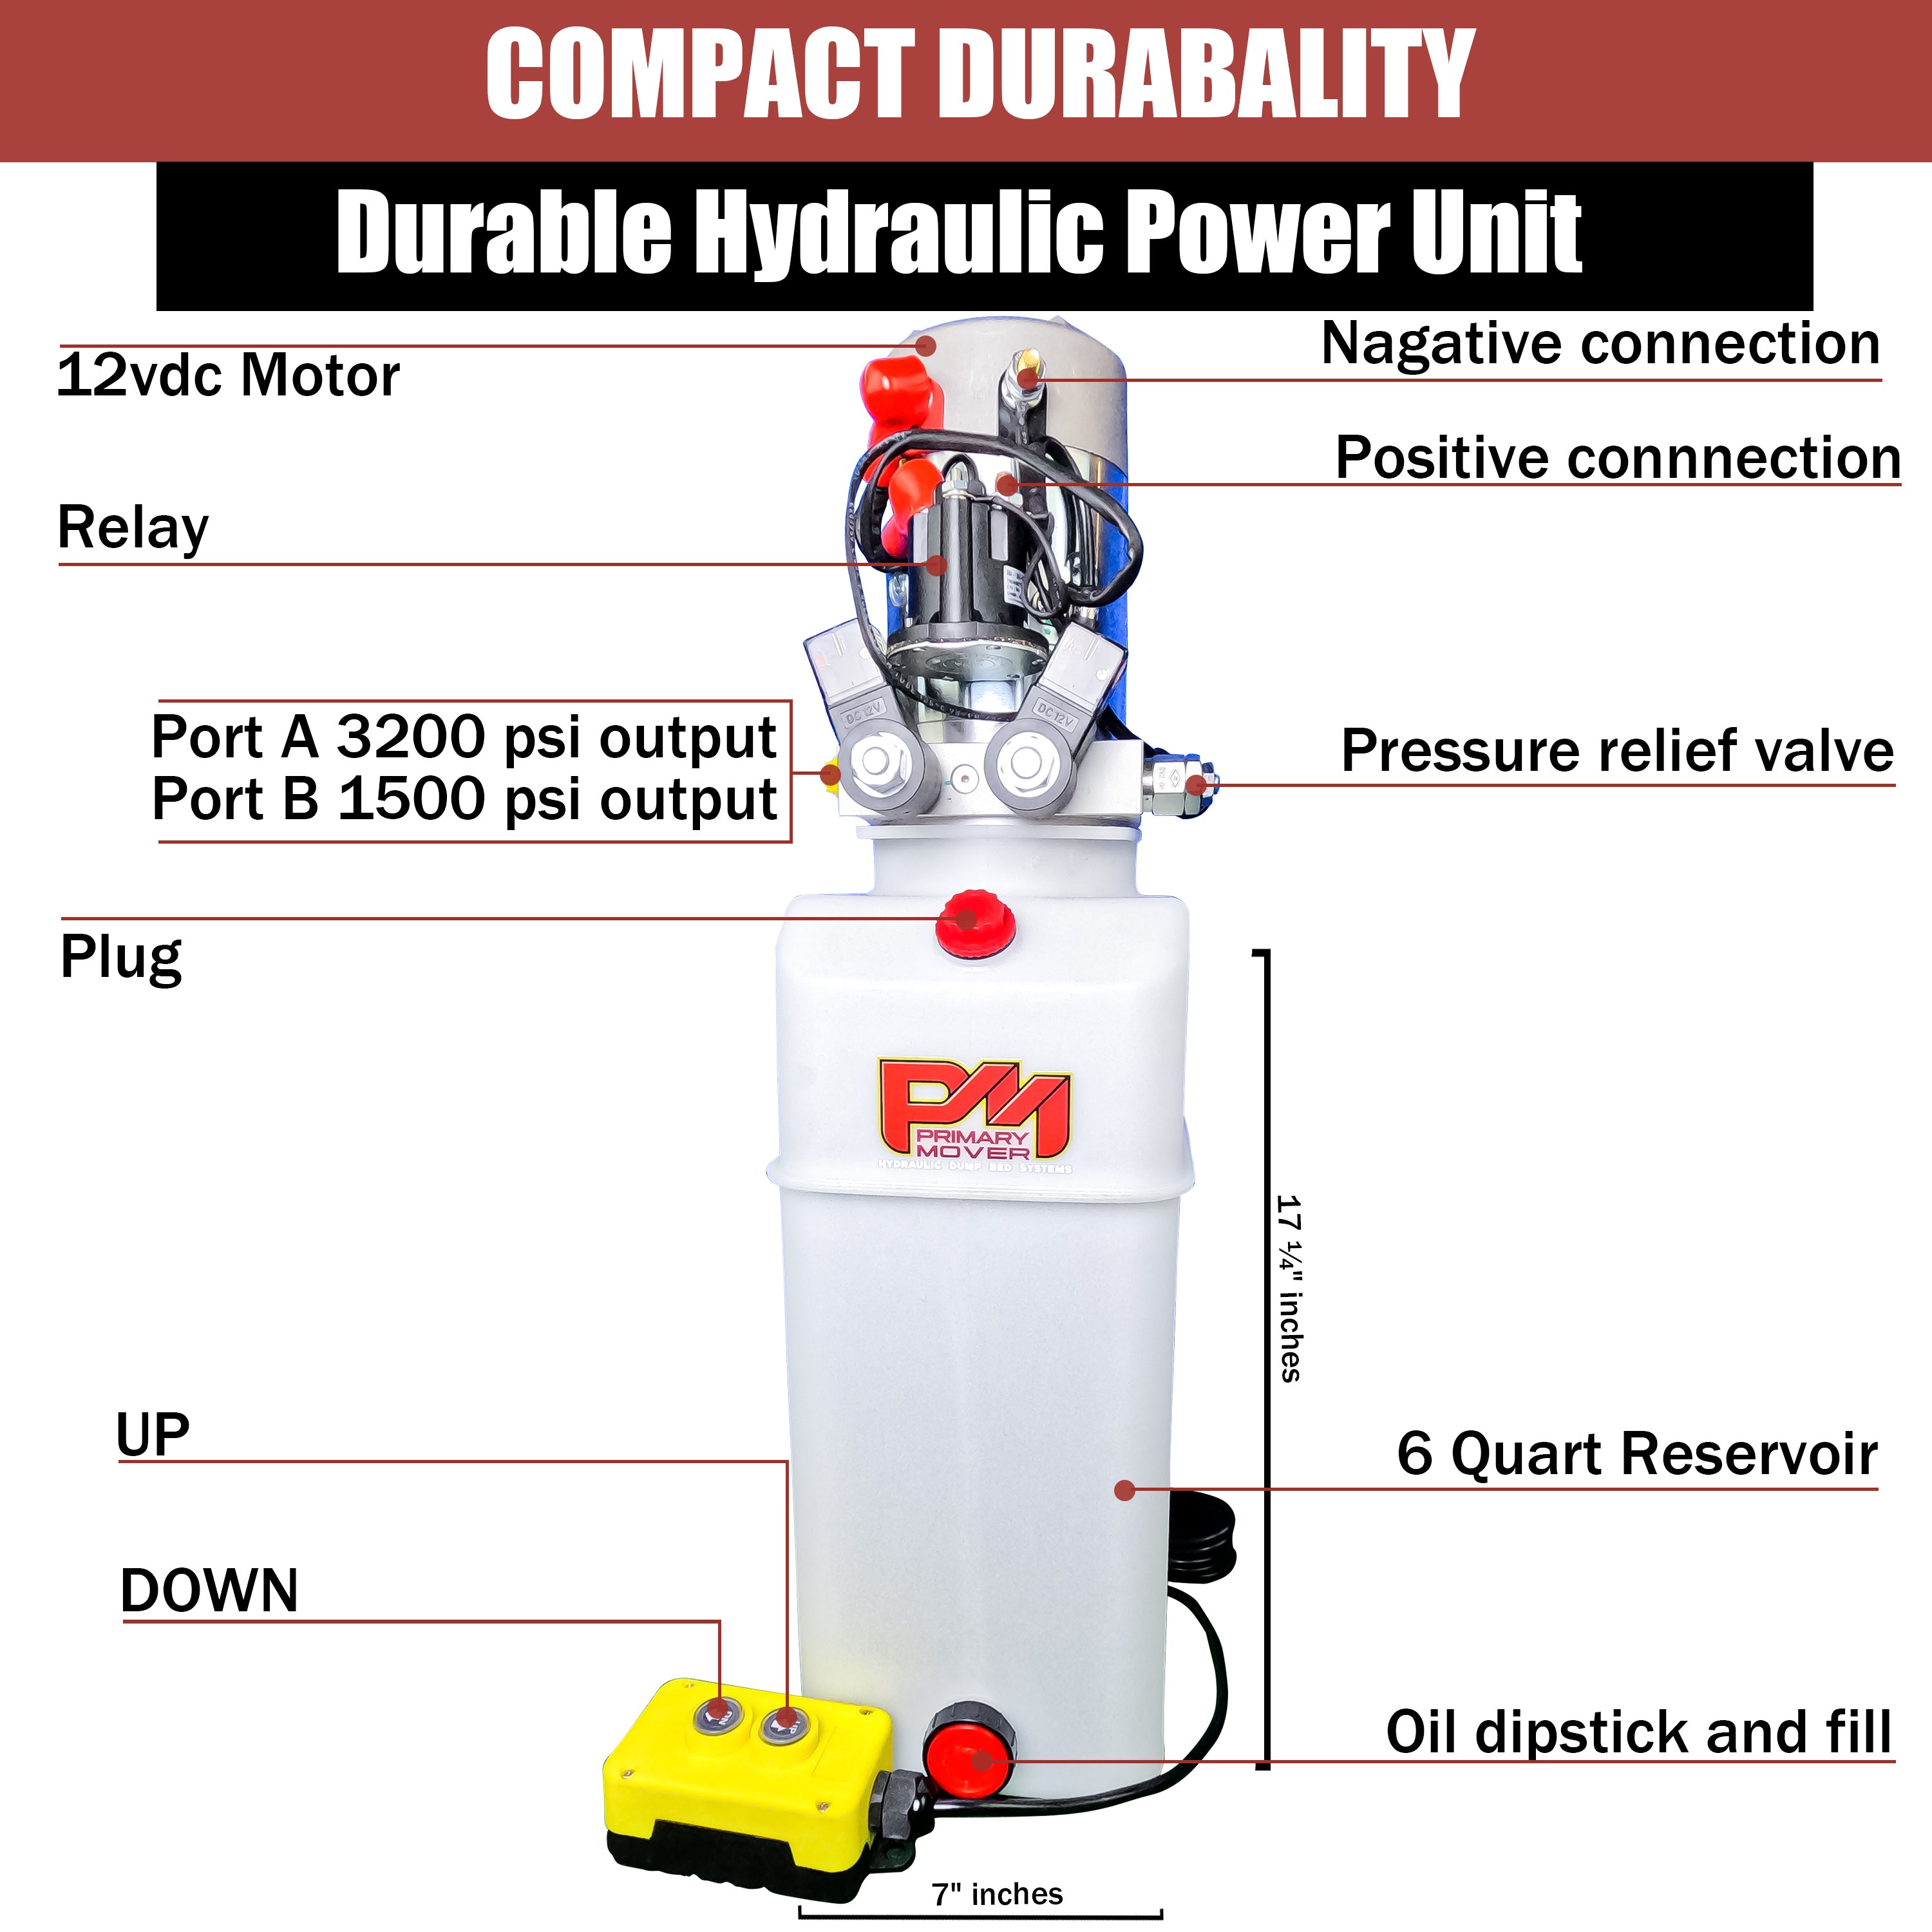 Diagram of a Primary Mover 12V Double-Acting Hydraulic Pump with red and white components, featuring a dual-acting design for precision and efficiency in hydraulic dump bed systems.